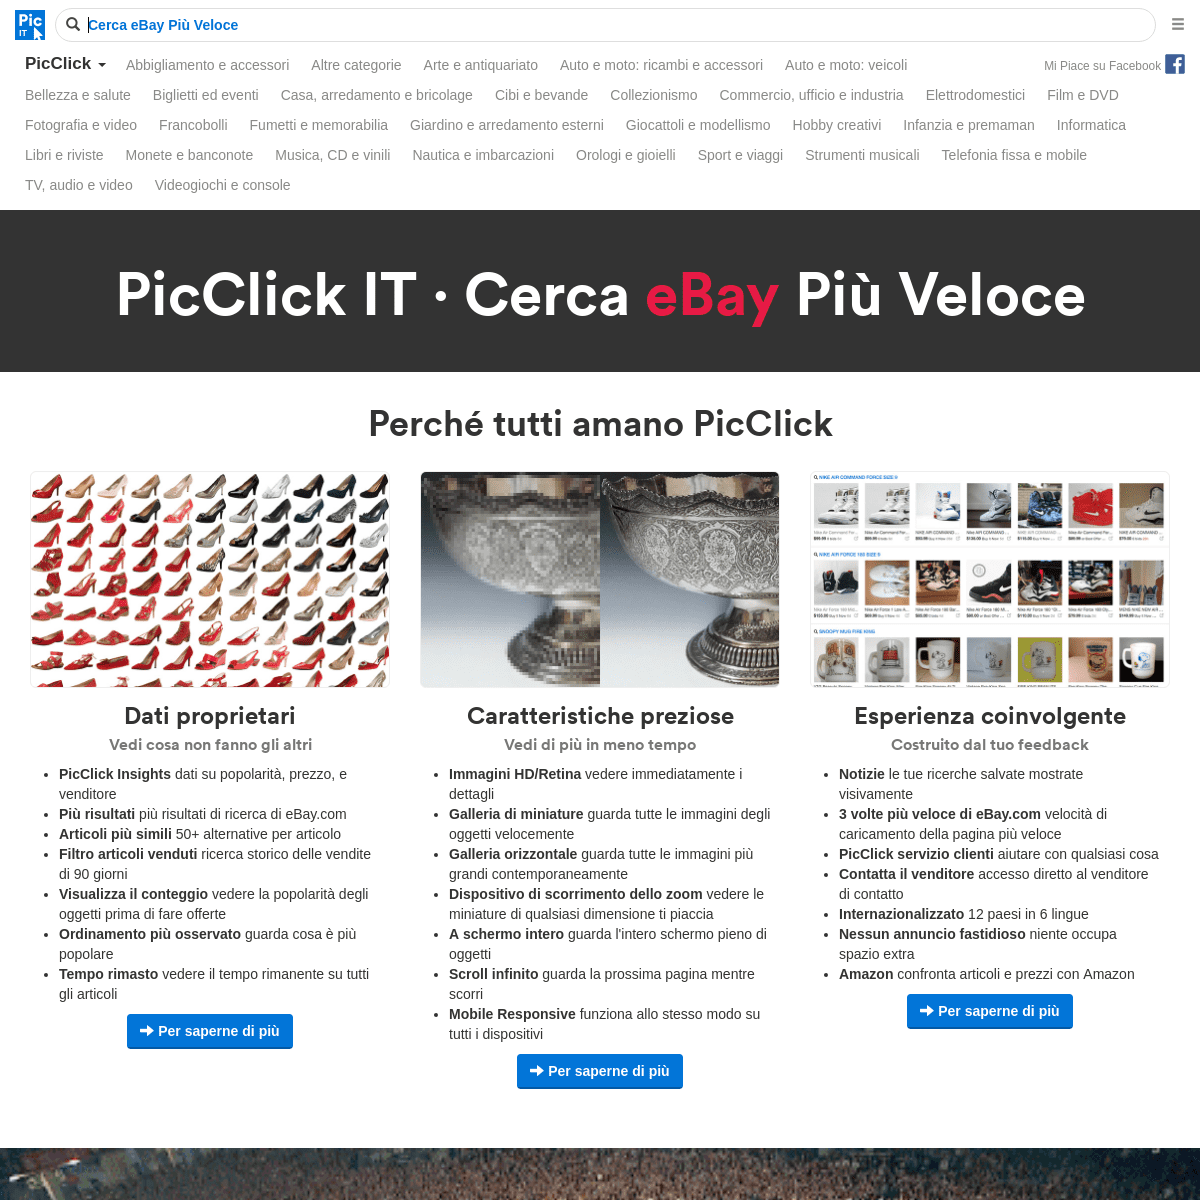 A complete backup of picclick.it